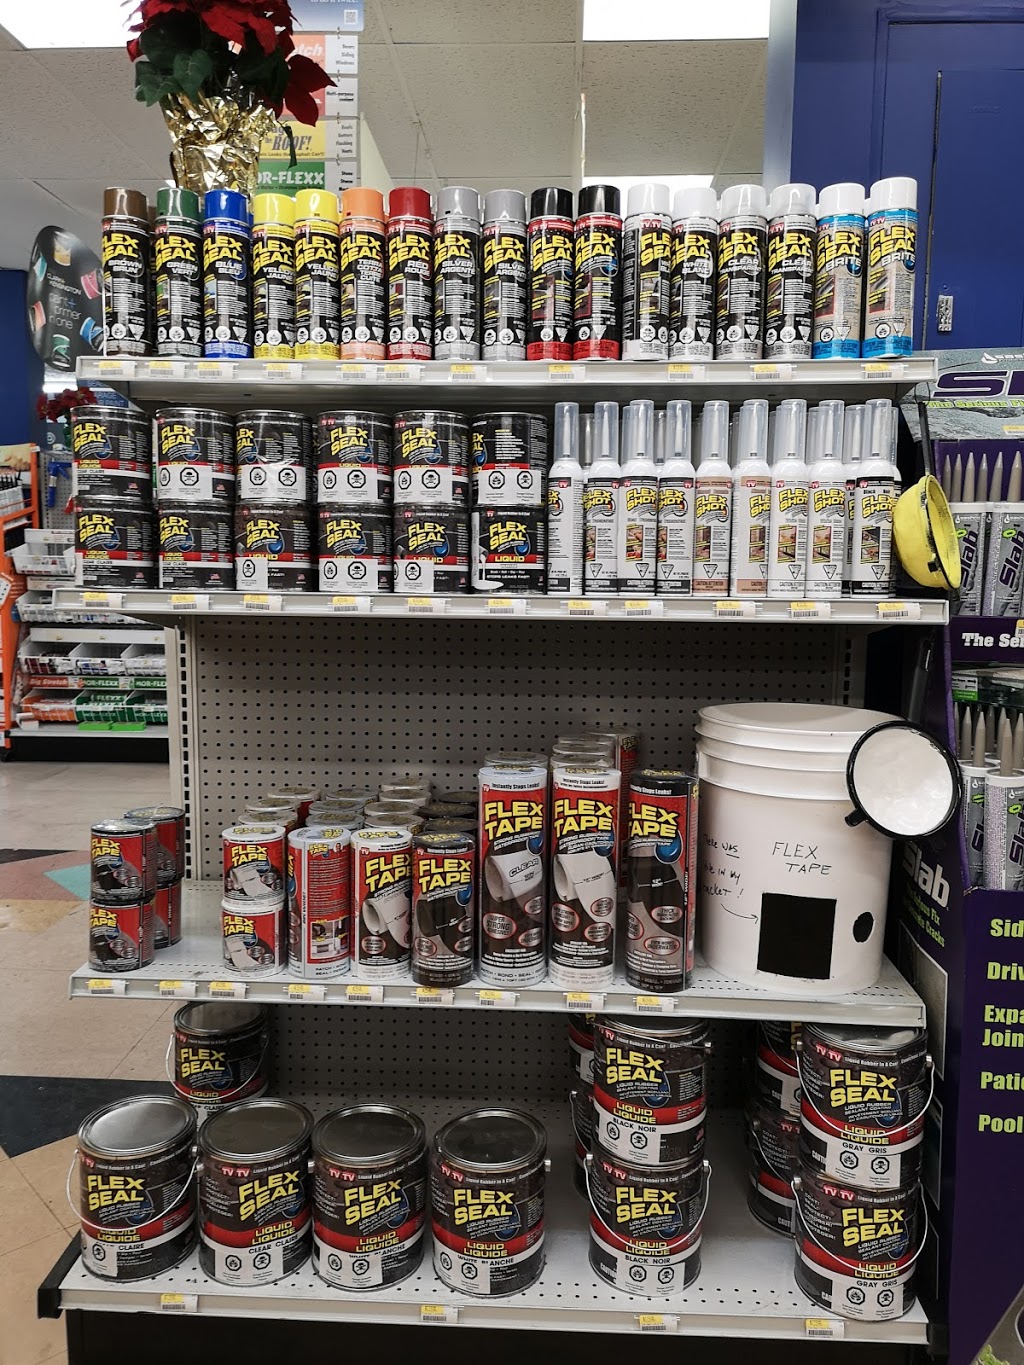 Industrial Plastics & Paints | hardware store | 776 Cloverdale Ave, Victoria, BC V8X 2S7, Canada | 2507273545 OR +1 250-727-3545